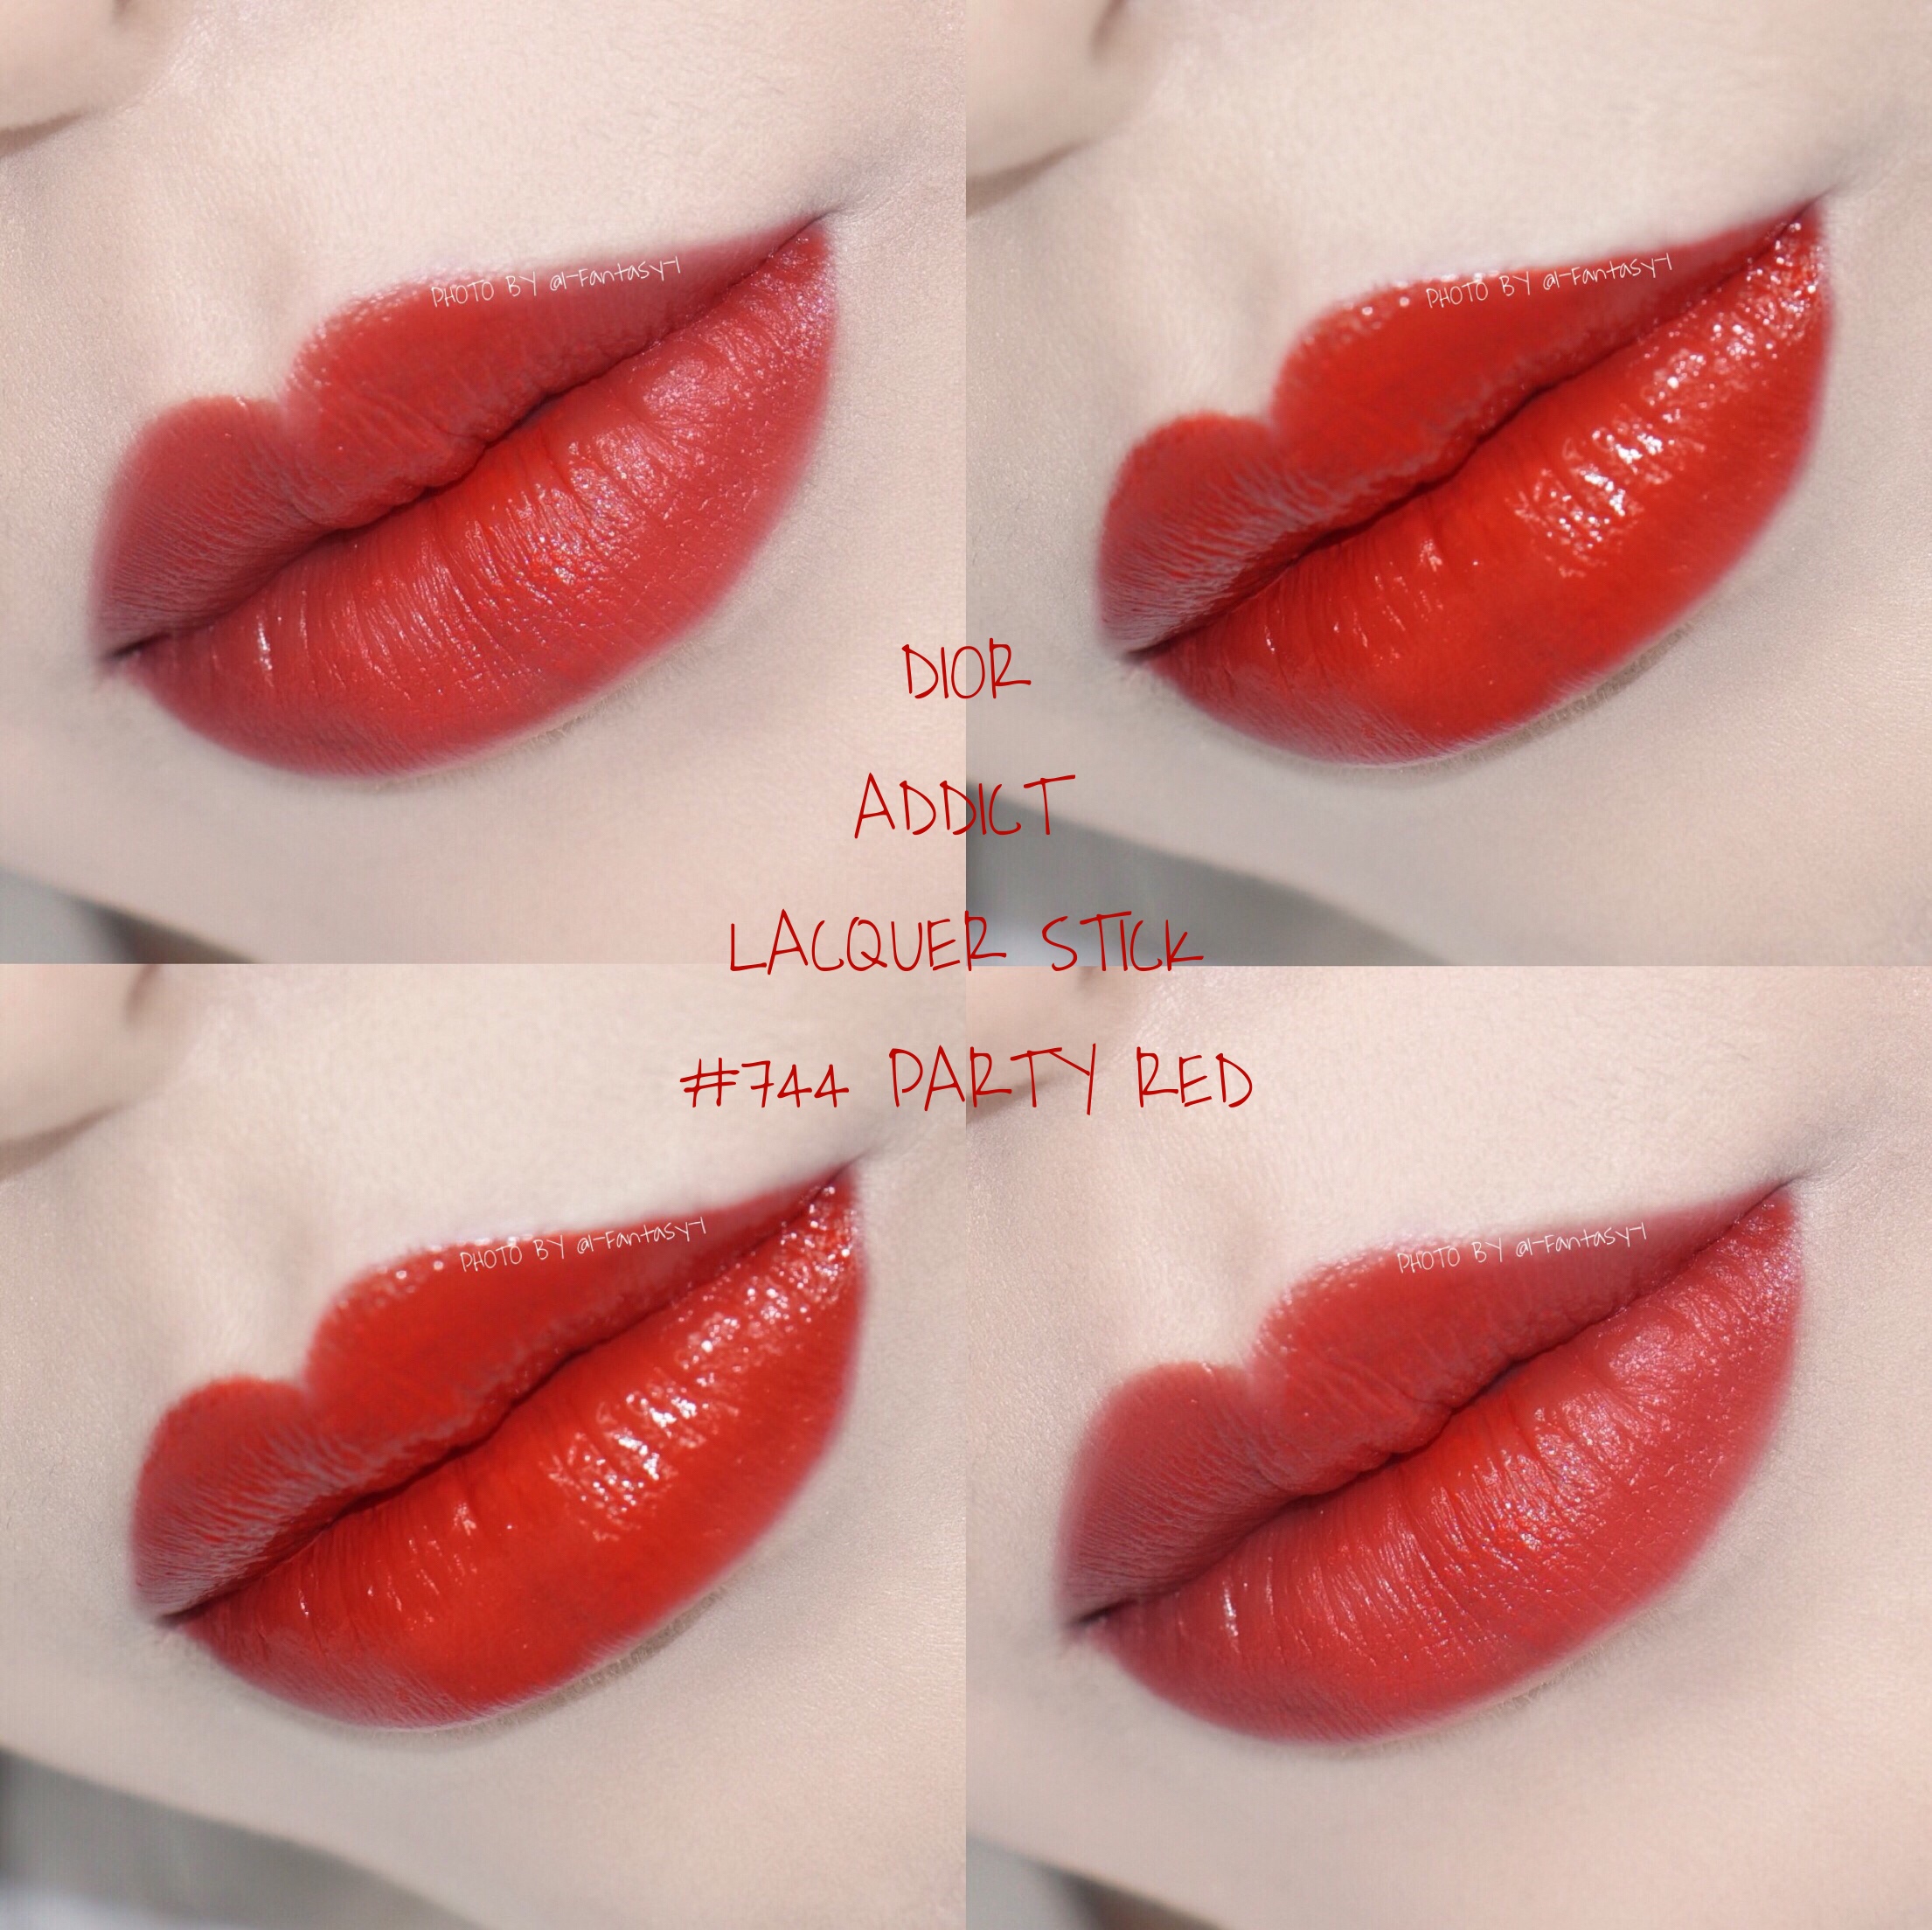 DIOR /ADDICT LACQUER STICK #744 PARTY RED 试色